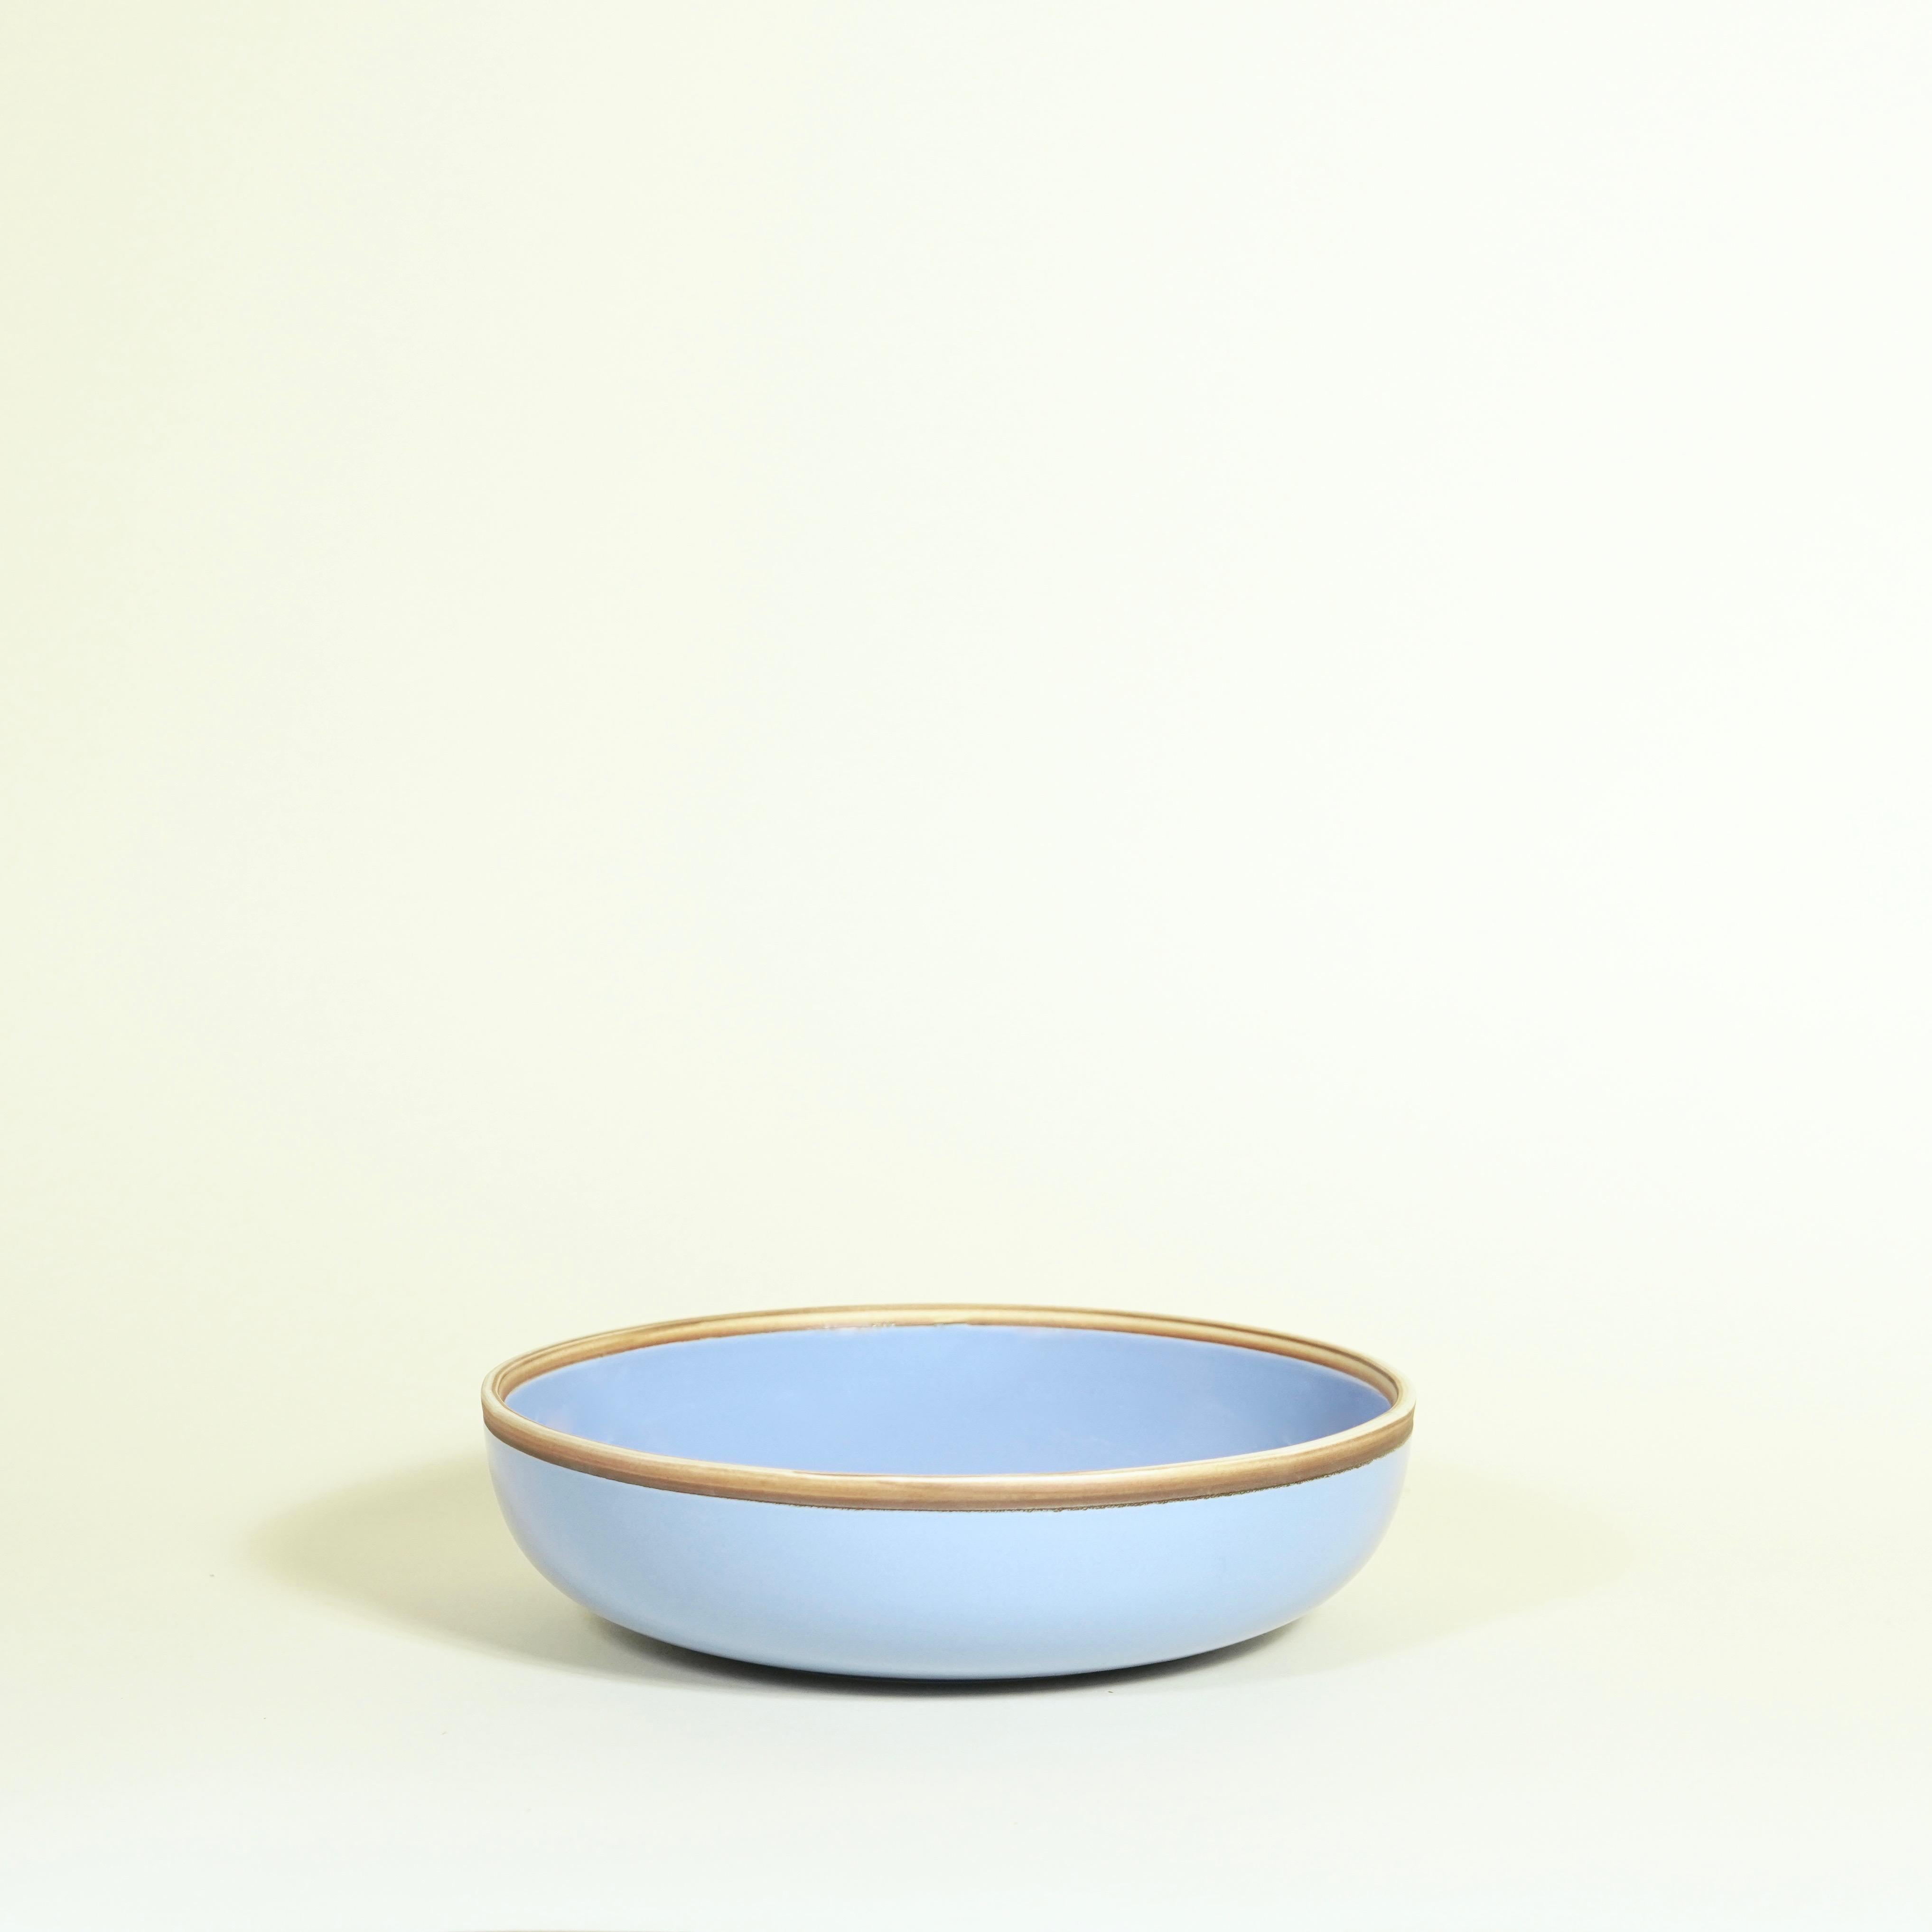 Chinese Extra Large Lavender Glazed Porcelain Hermit Bowl with Rustic Rim